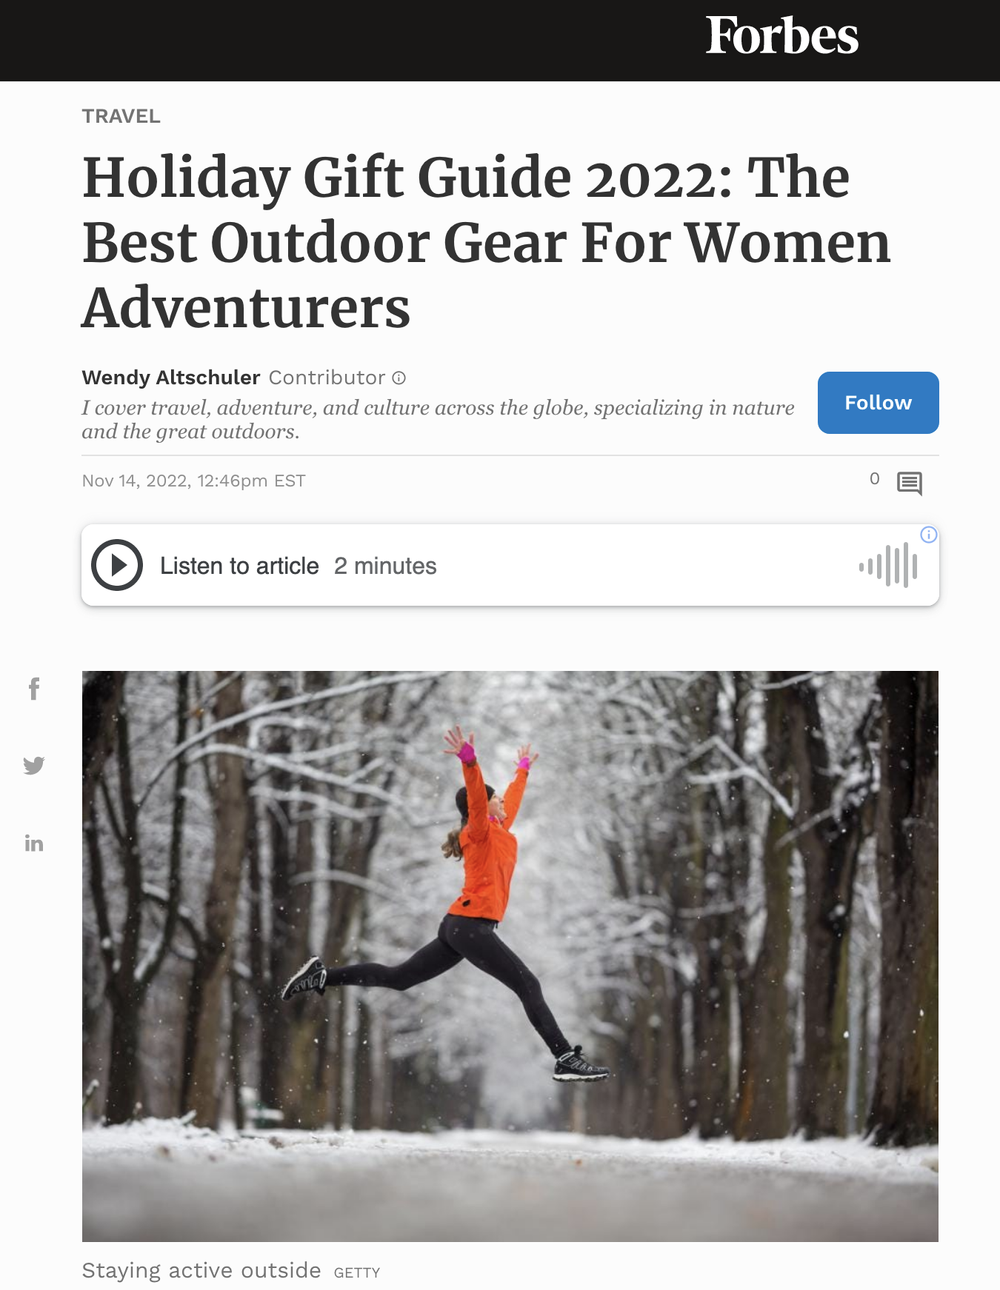 Holiday Gift Guide 2022: The Best Outdoor Gear For Women Adventurers